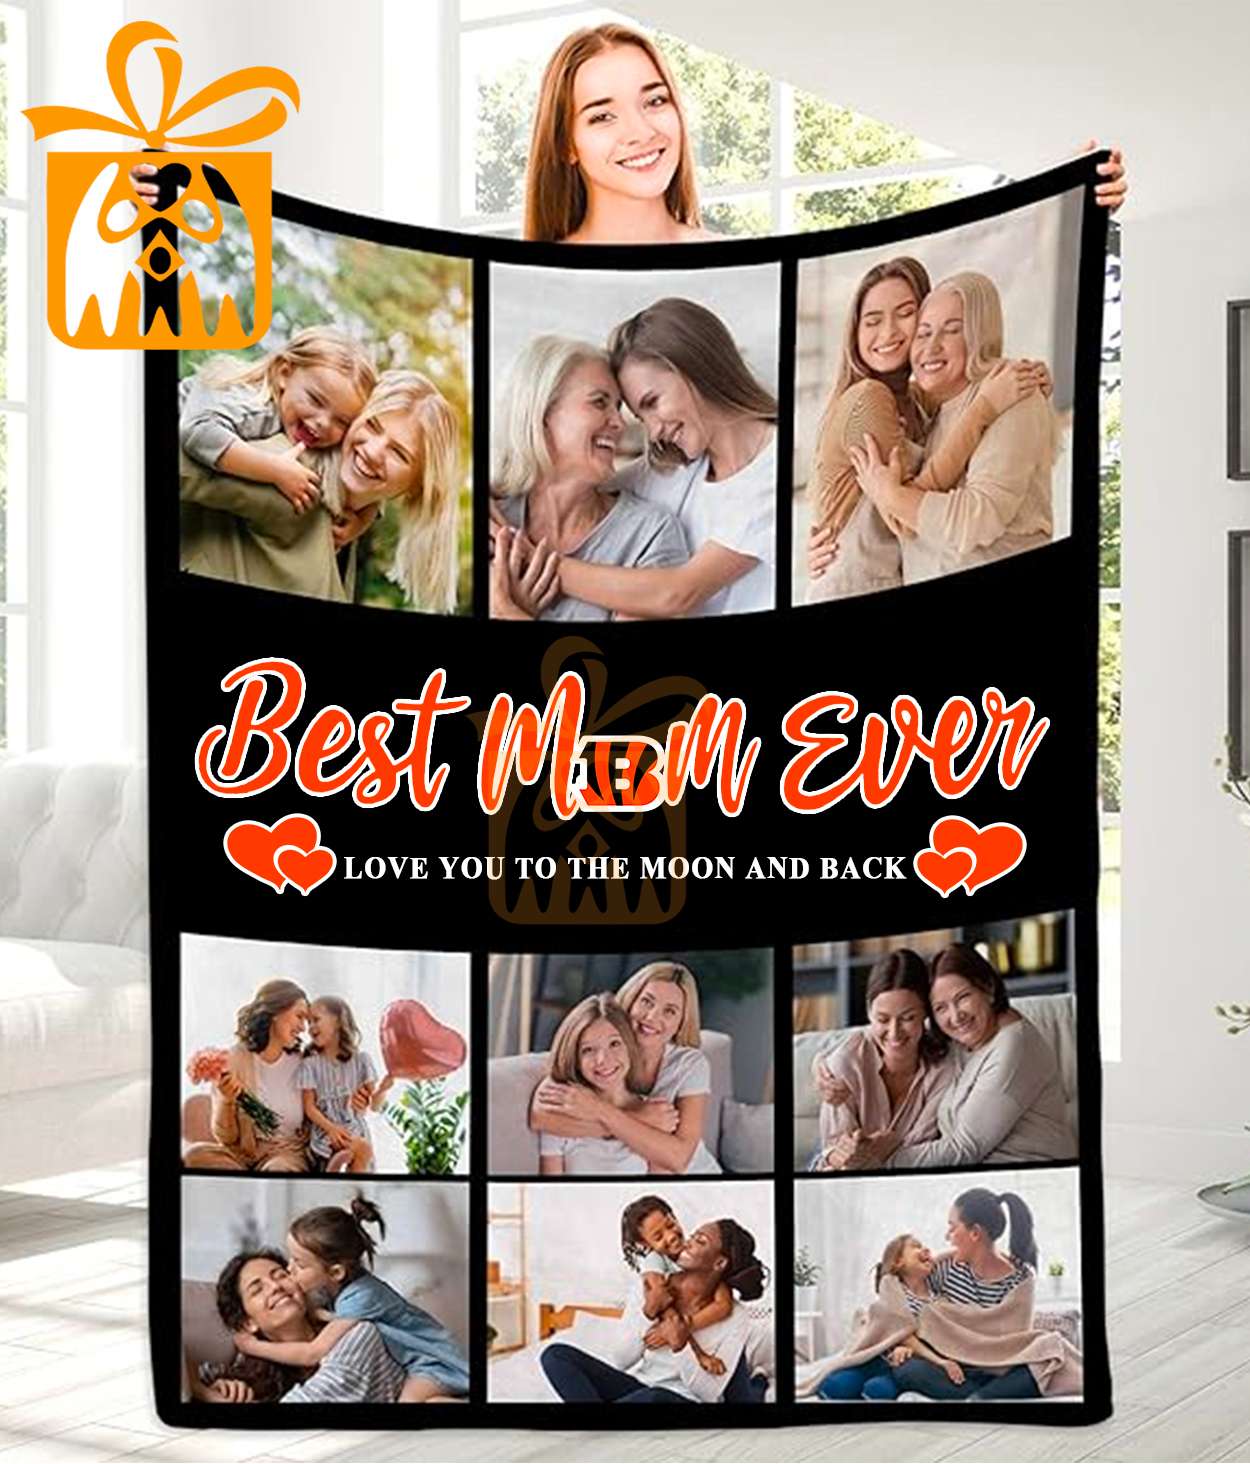 Best Mom Ever Custom NFL Cincinnati Bengals Blankets with Pictures - Perfect Mother’s Day Gift